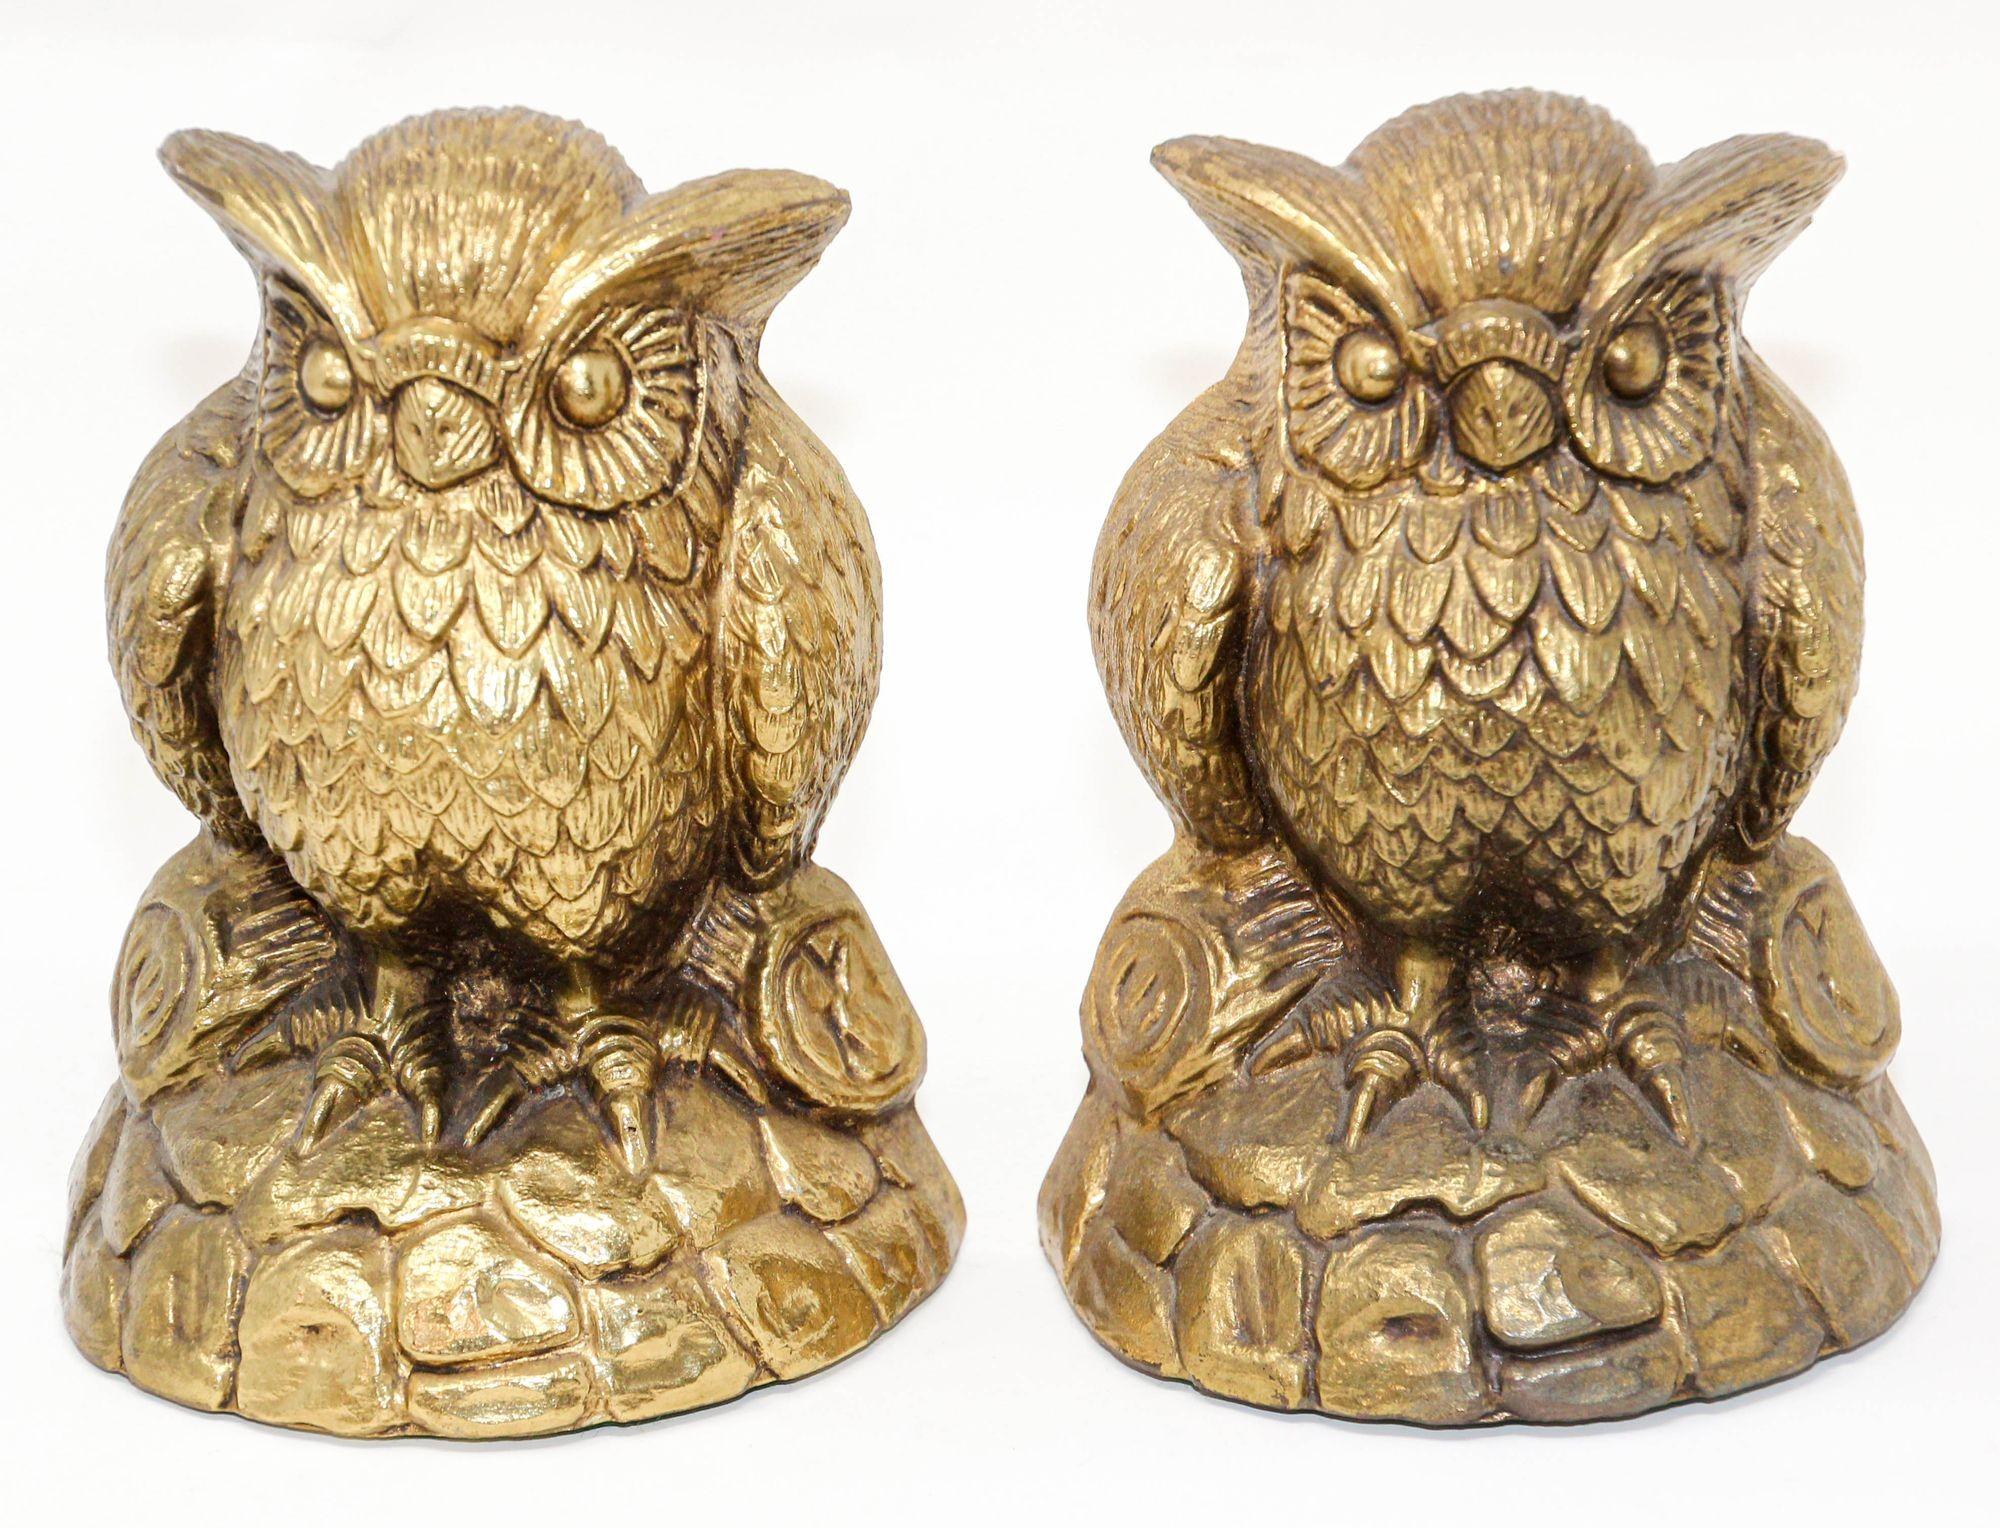 Vintage Cast Solid Brass Owl Bookends Mid-Century Modern 1950s In Good Condition For Sale In North Hollywood, CA